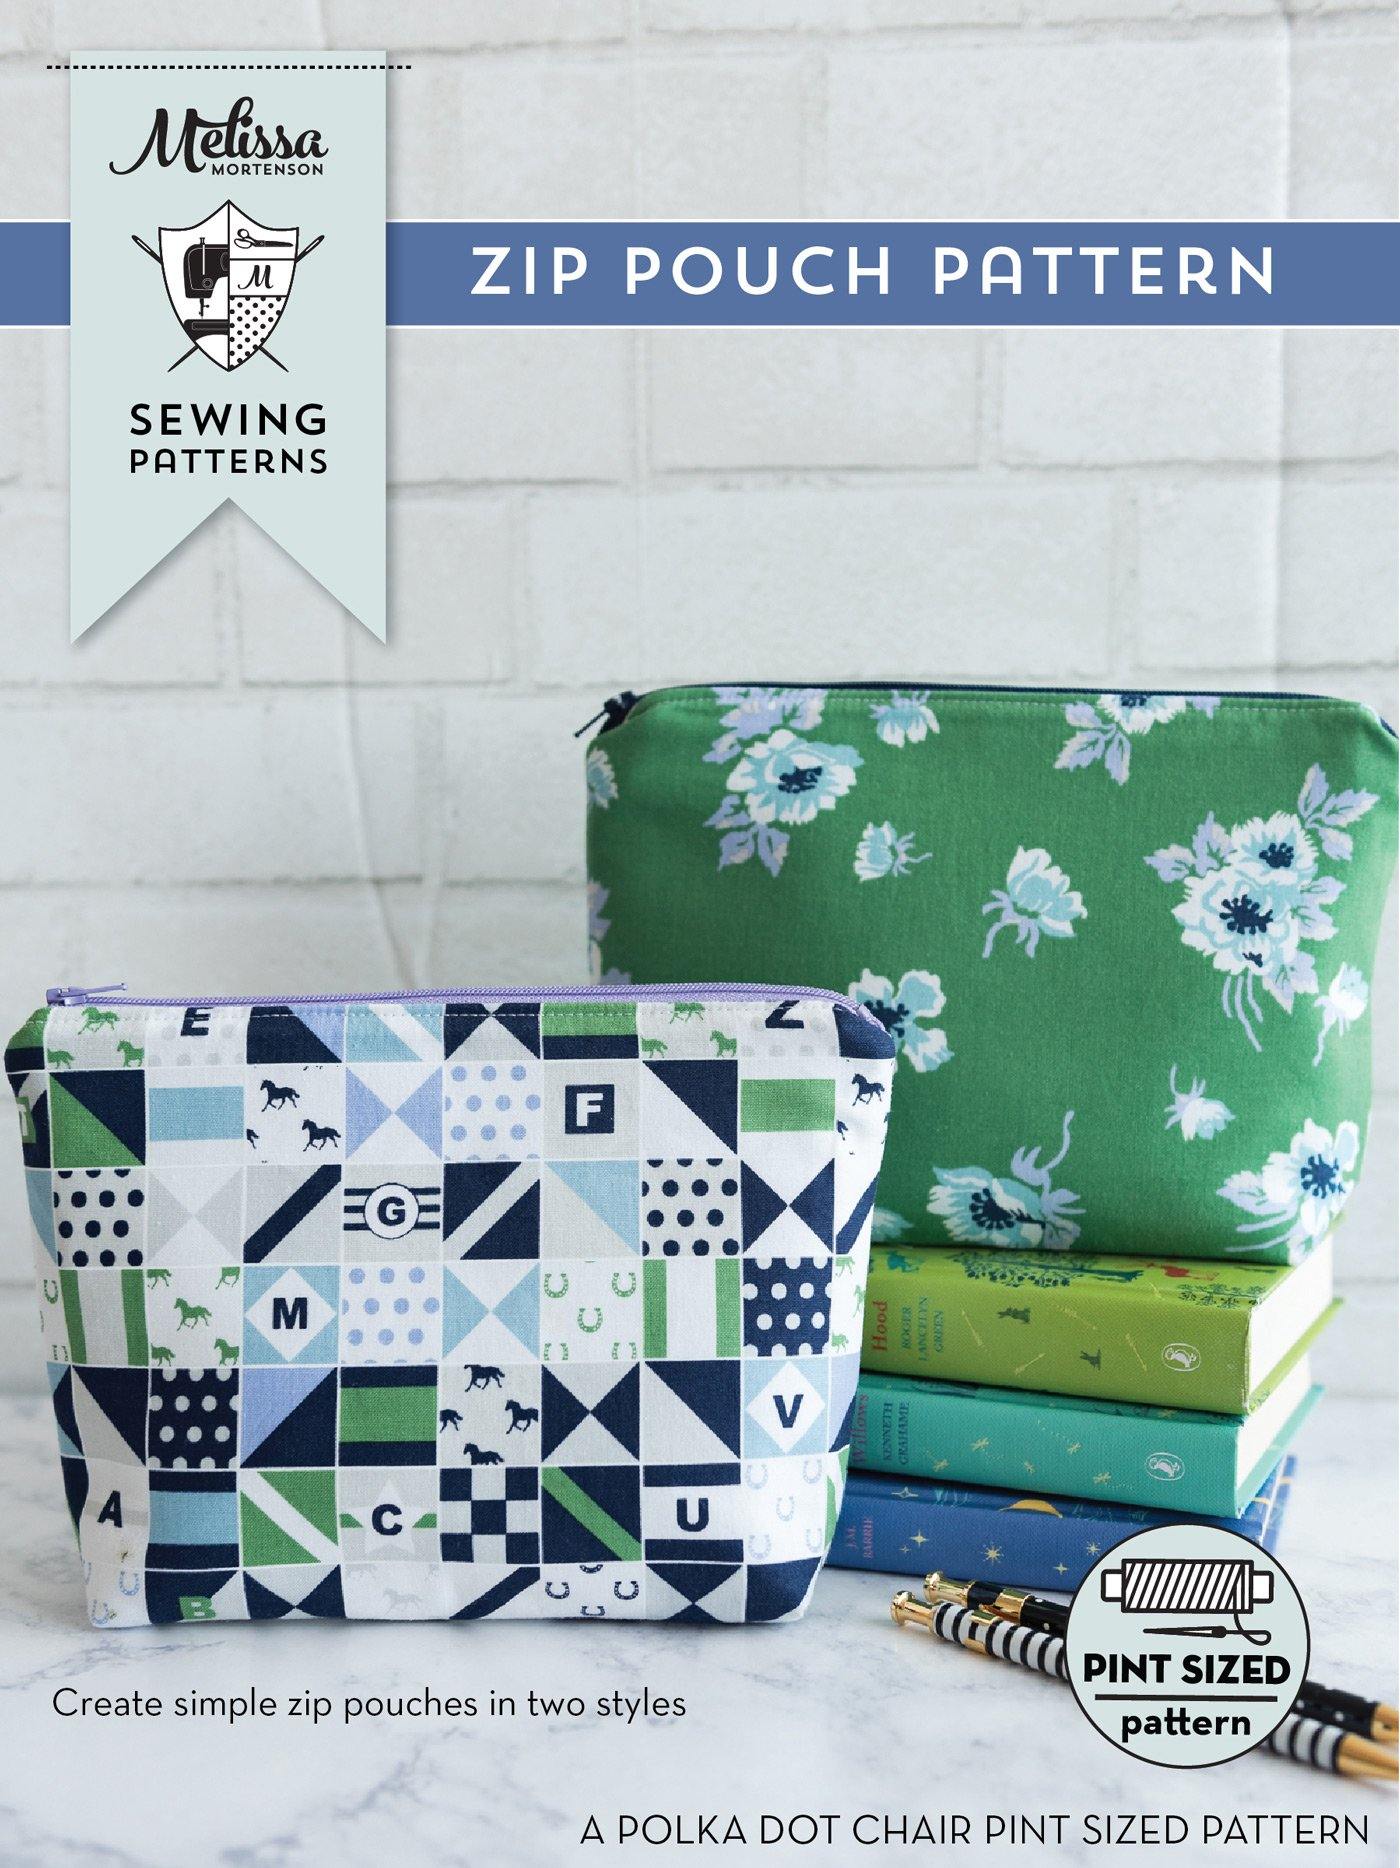 Double Zip Pouch Pattern Tutorial - How To Add Card Pockets to the Lining /  LBG STUDIO